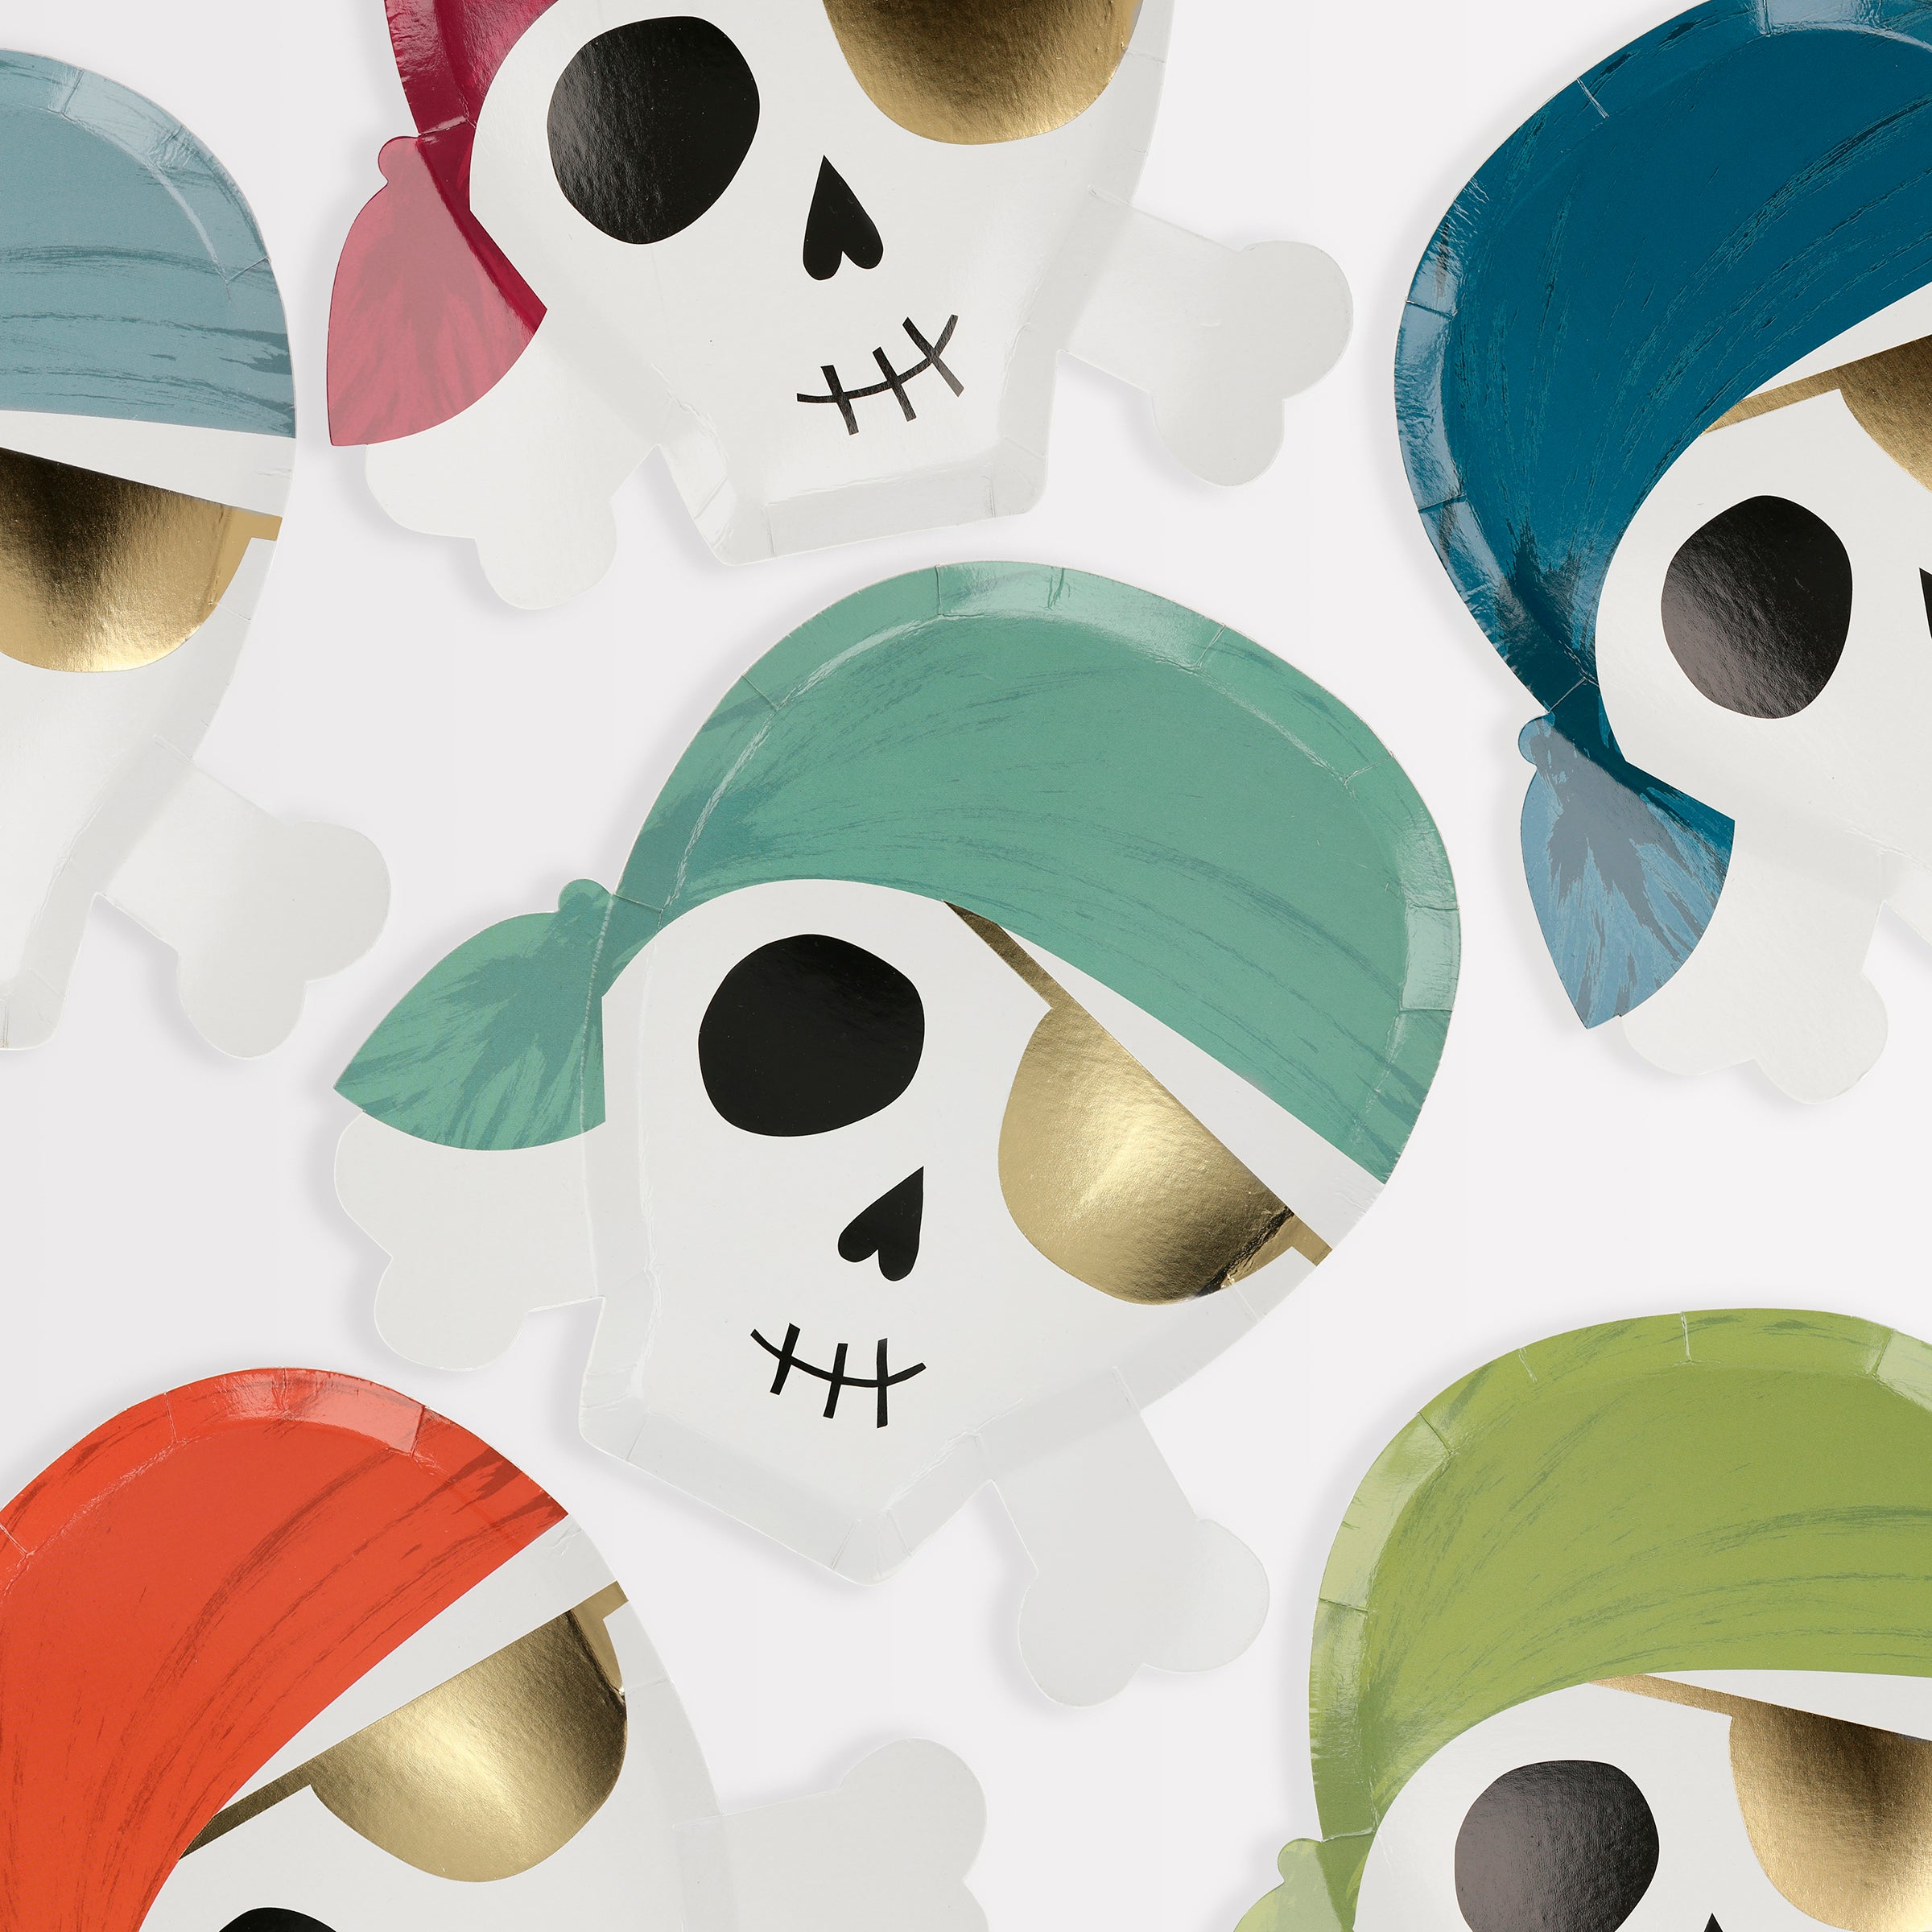 Our paper plates, perfect for a pirate birthday party, have skull and crossbone designs with colourful bandanas.